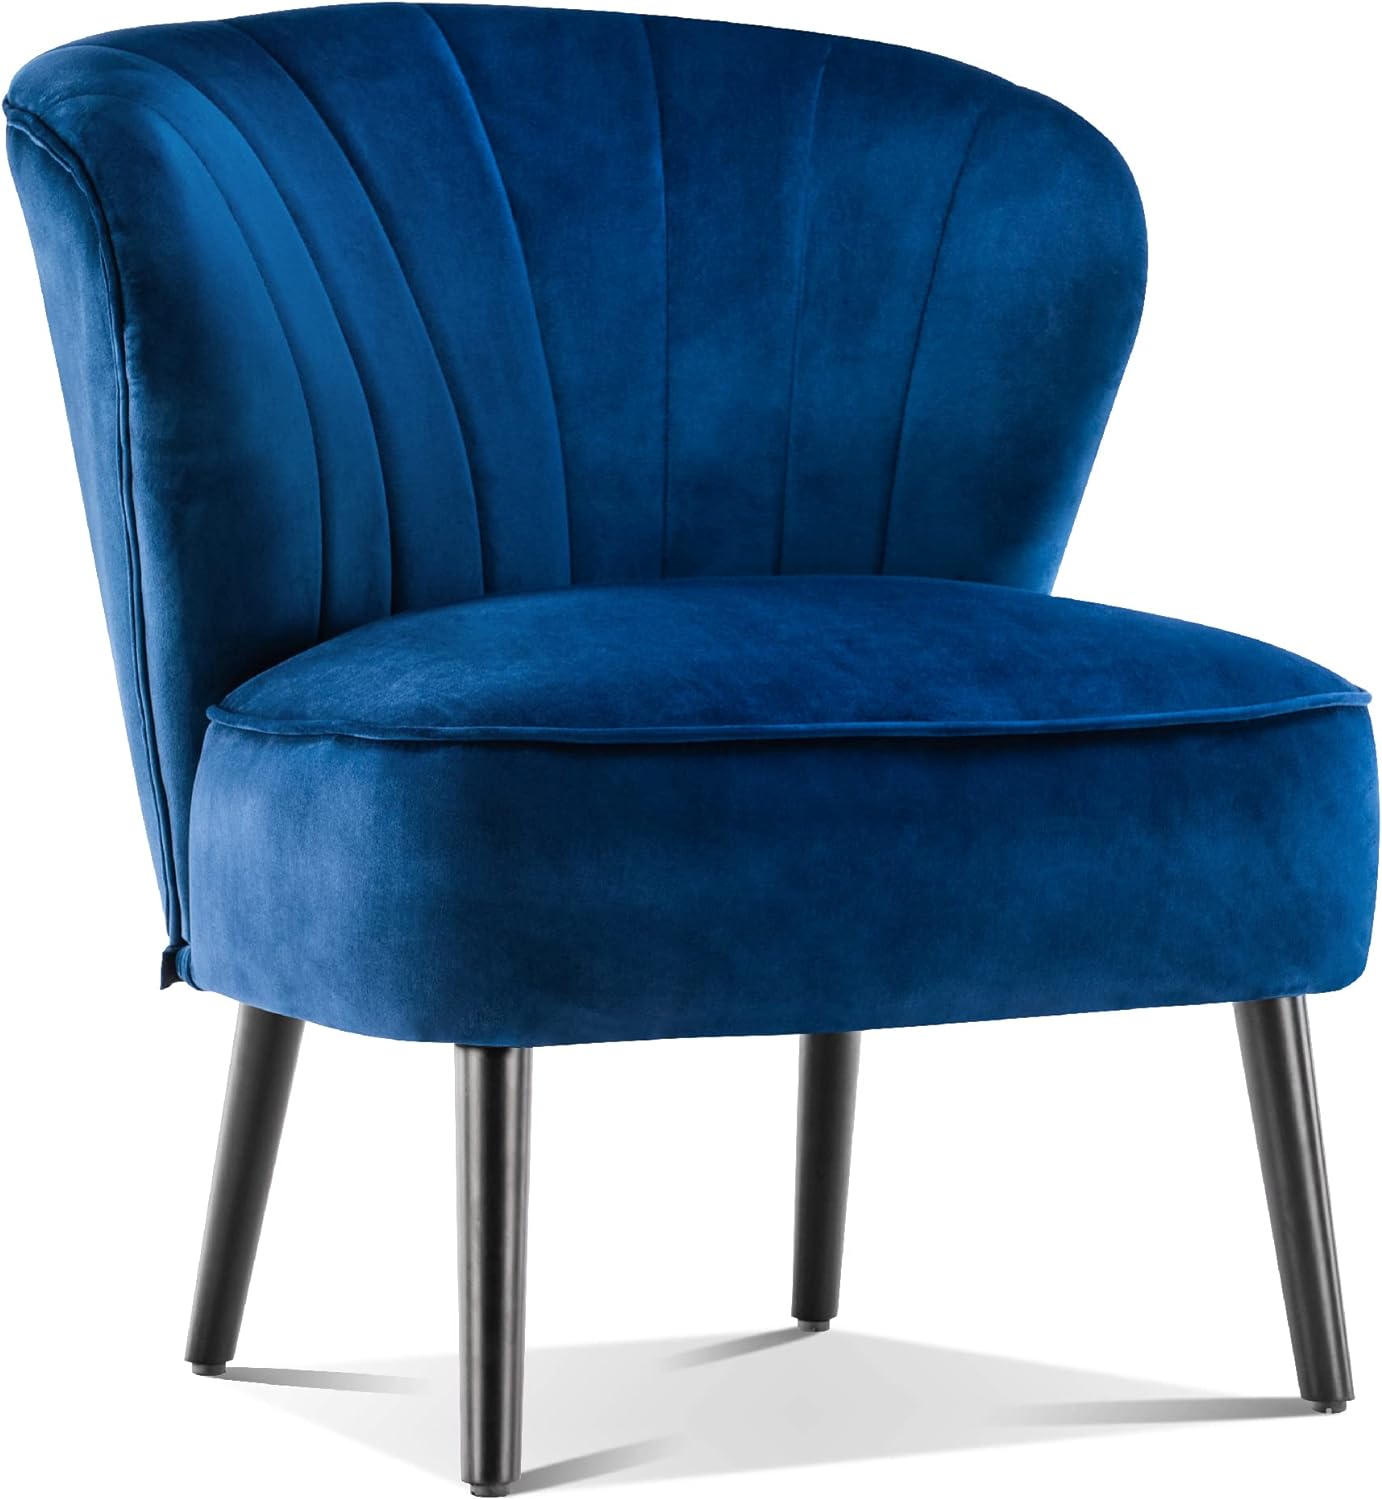 Mcombo Modern Accent Chair, Velvet Tufted Wingback Chairs, Upholstered Side Chair, Comfy Shell Chair for Living Room Bedroom Rec